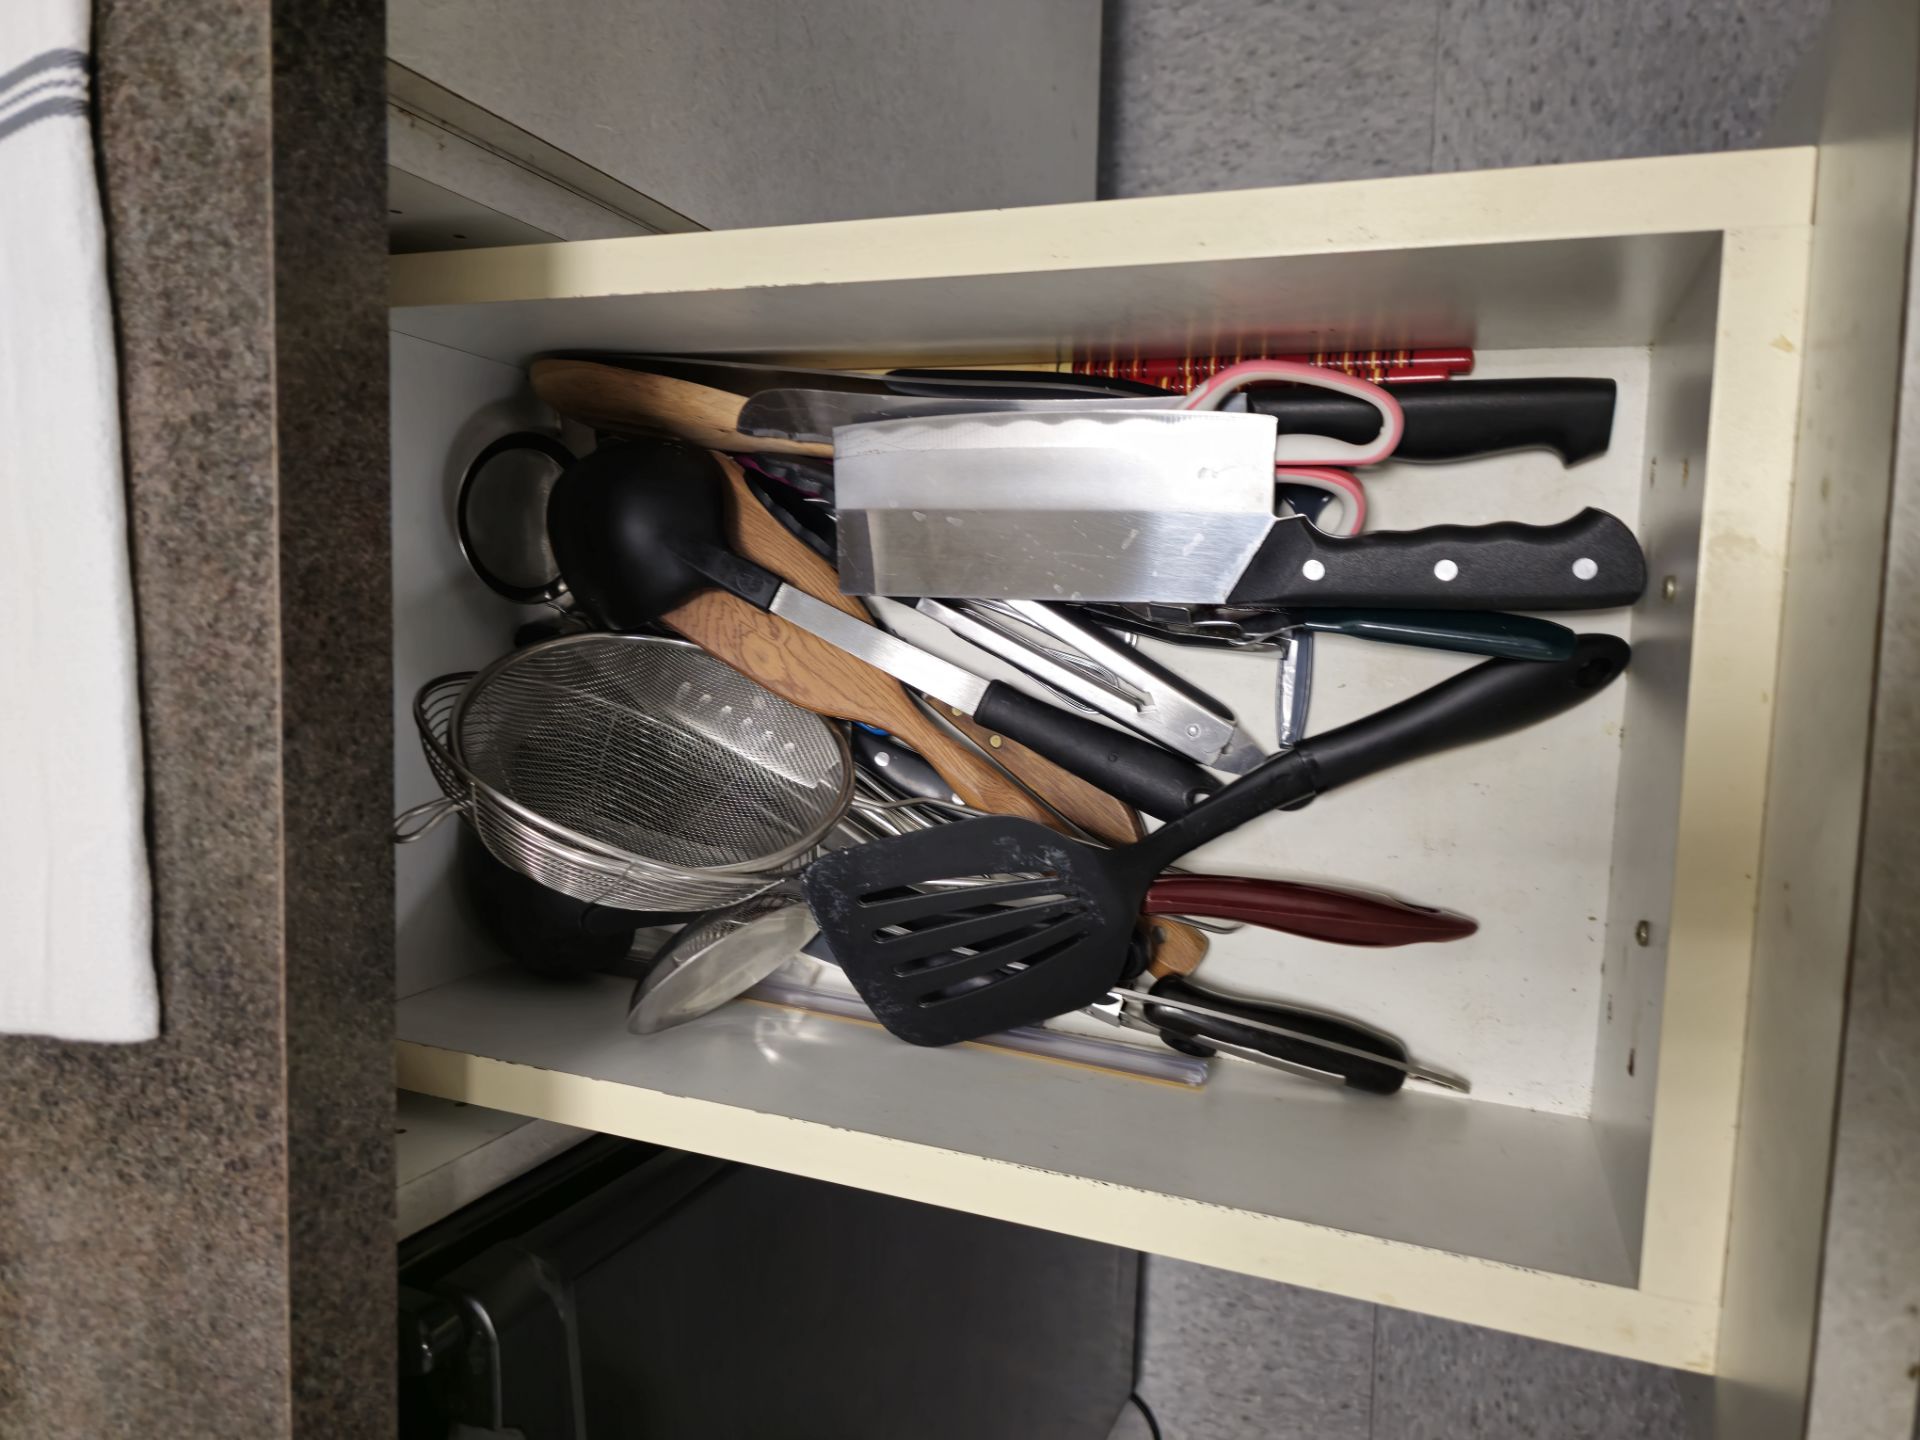 ALL KITCHEN UTENSILS AND SUPPLIES ON TOP AND INSID - Bild 2 aus 3